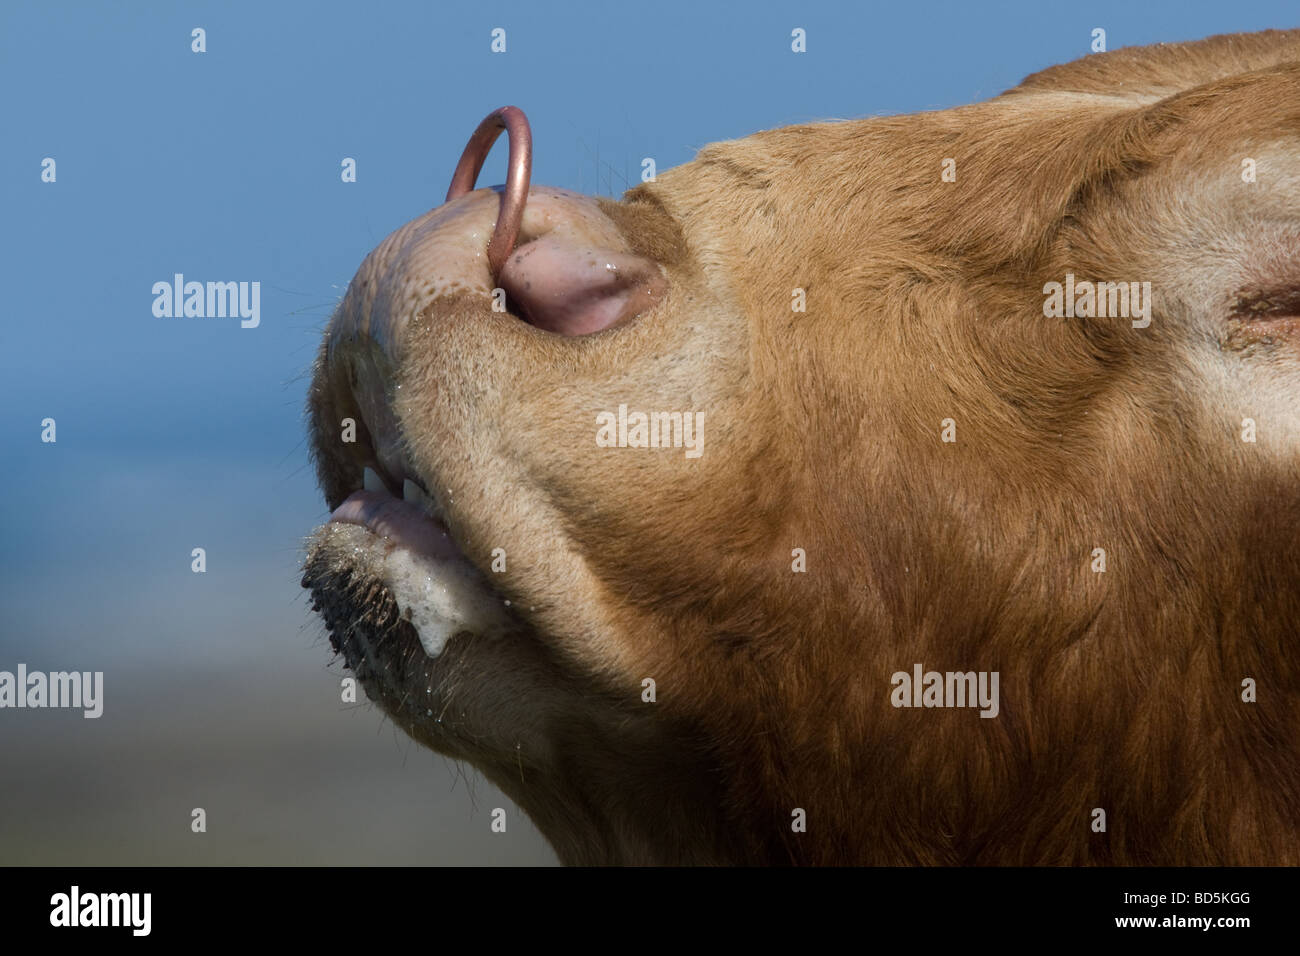 Head shot of a bull with ring in nose Stock Photo